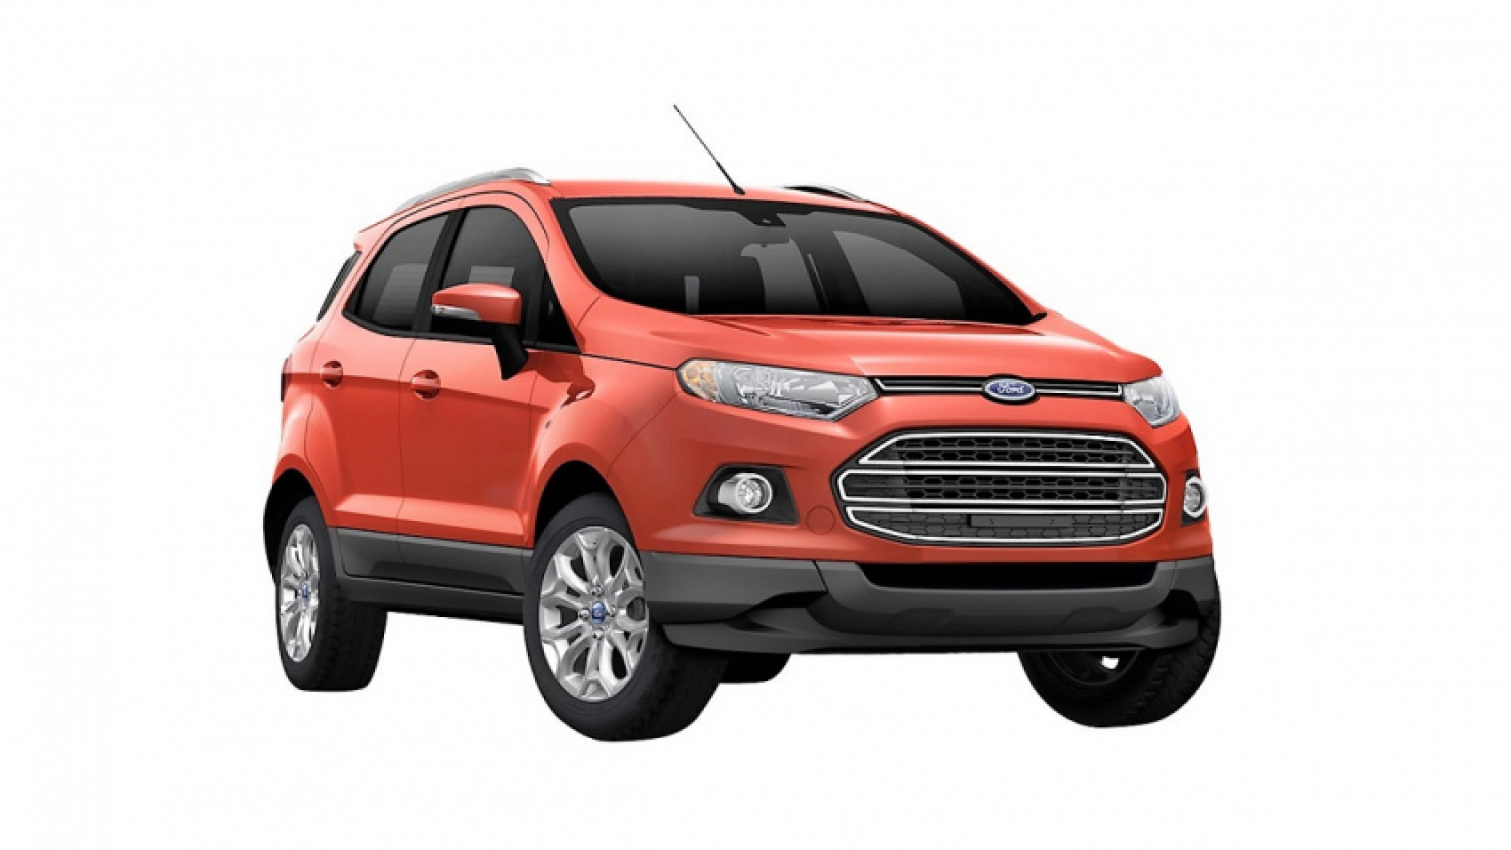 autos, car brands, cars, ford, ford fiesta, sdac, cash rebates and low repayments for selected ford fiesta and ecosport models